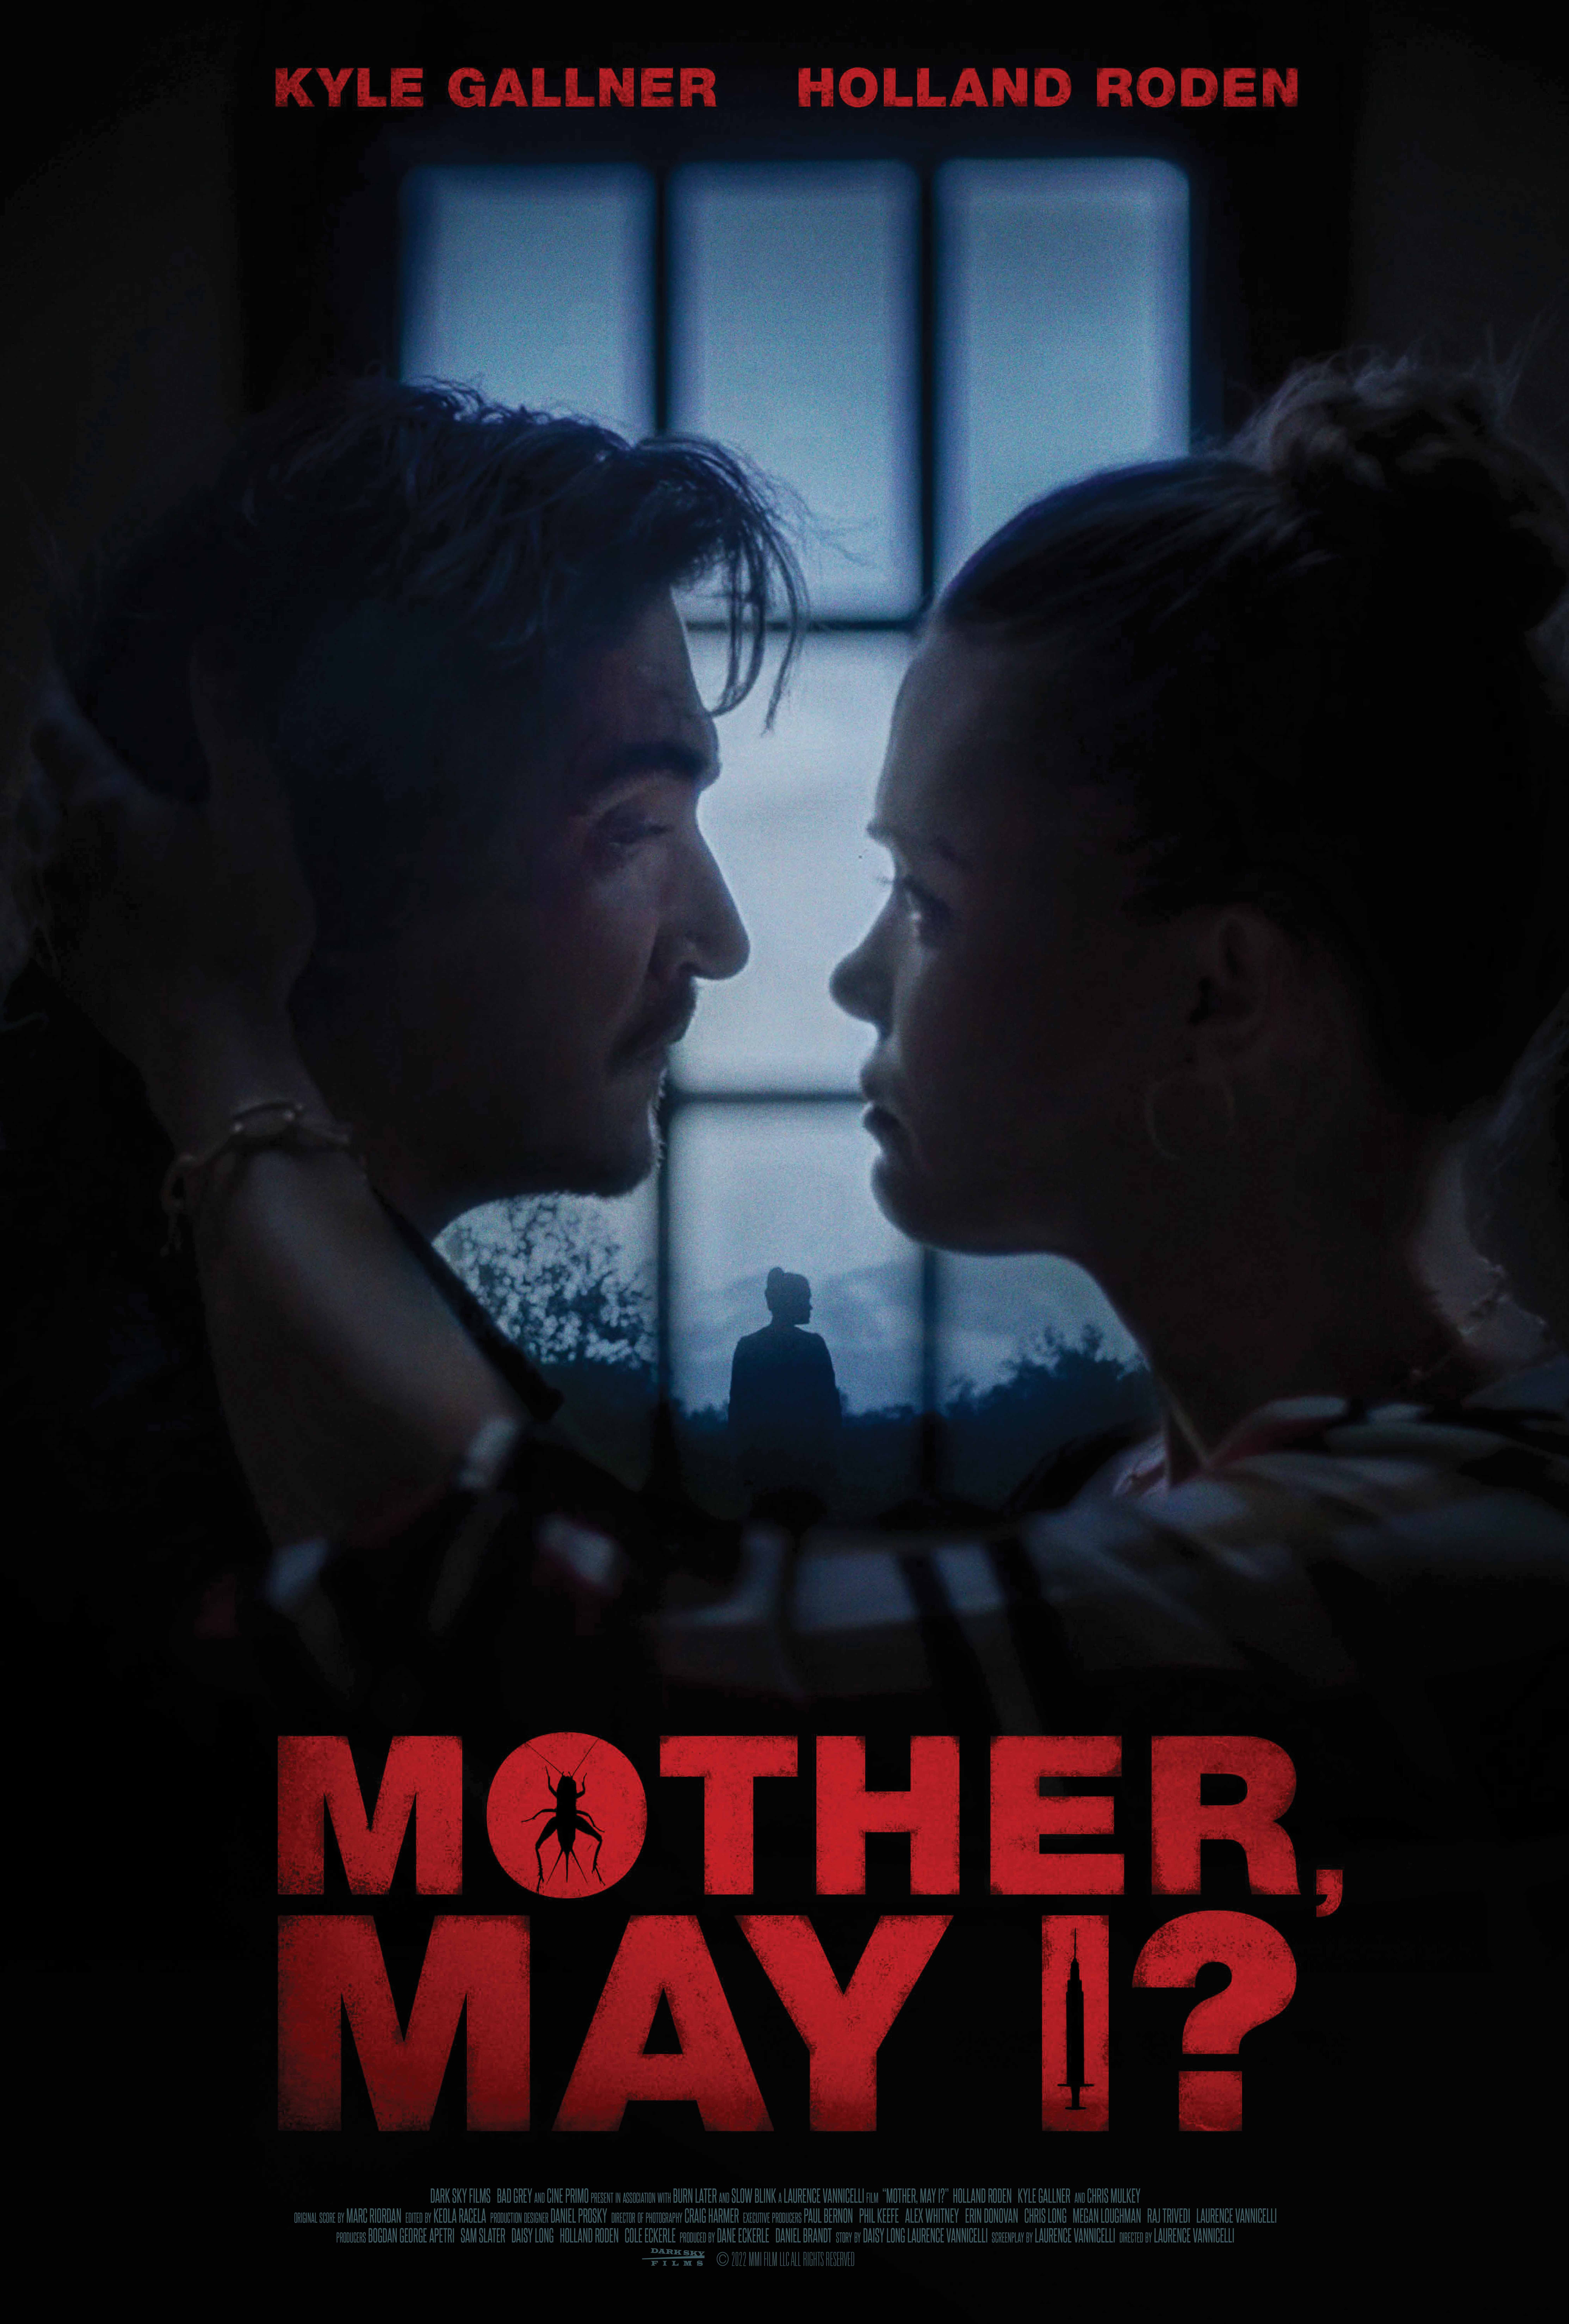 "Mother, May I?" - A Riveting Psychological Thriller Featuring Kyle Gallner and Holland Roden Set to Hit Theaters and VOD on July 21st 27